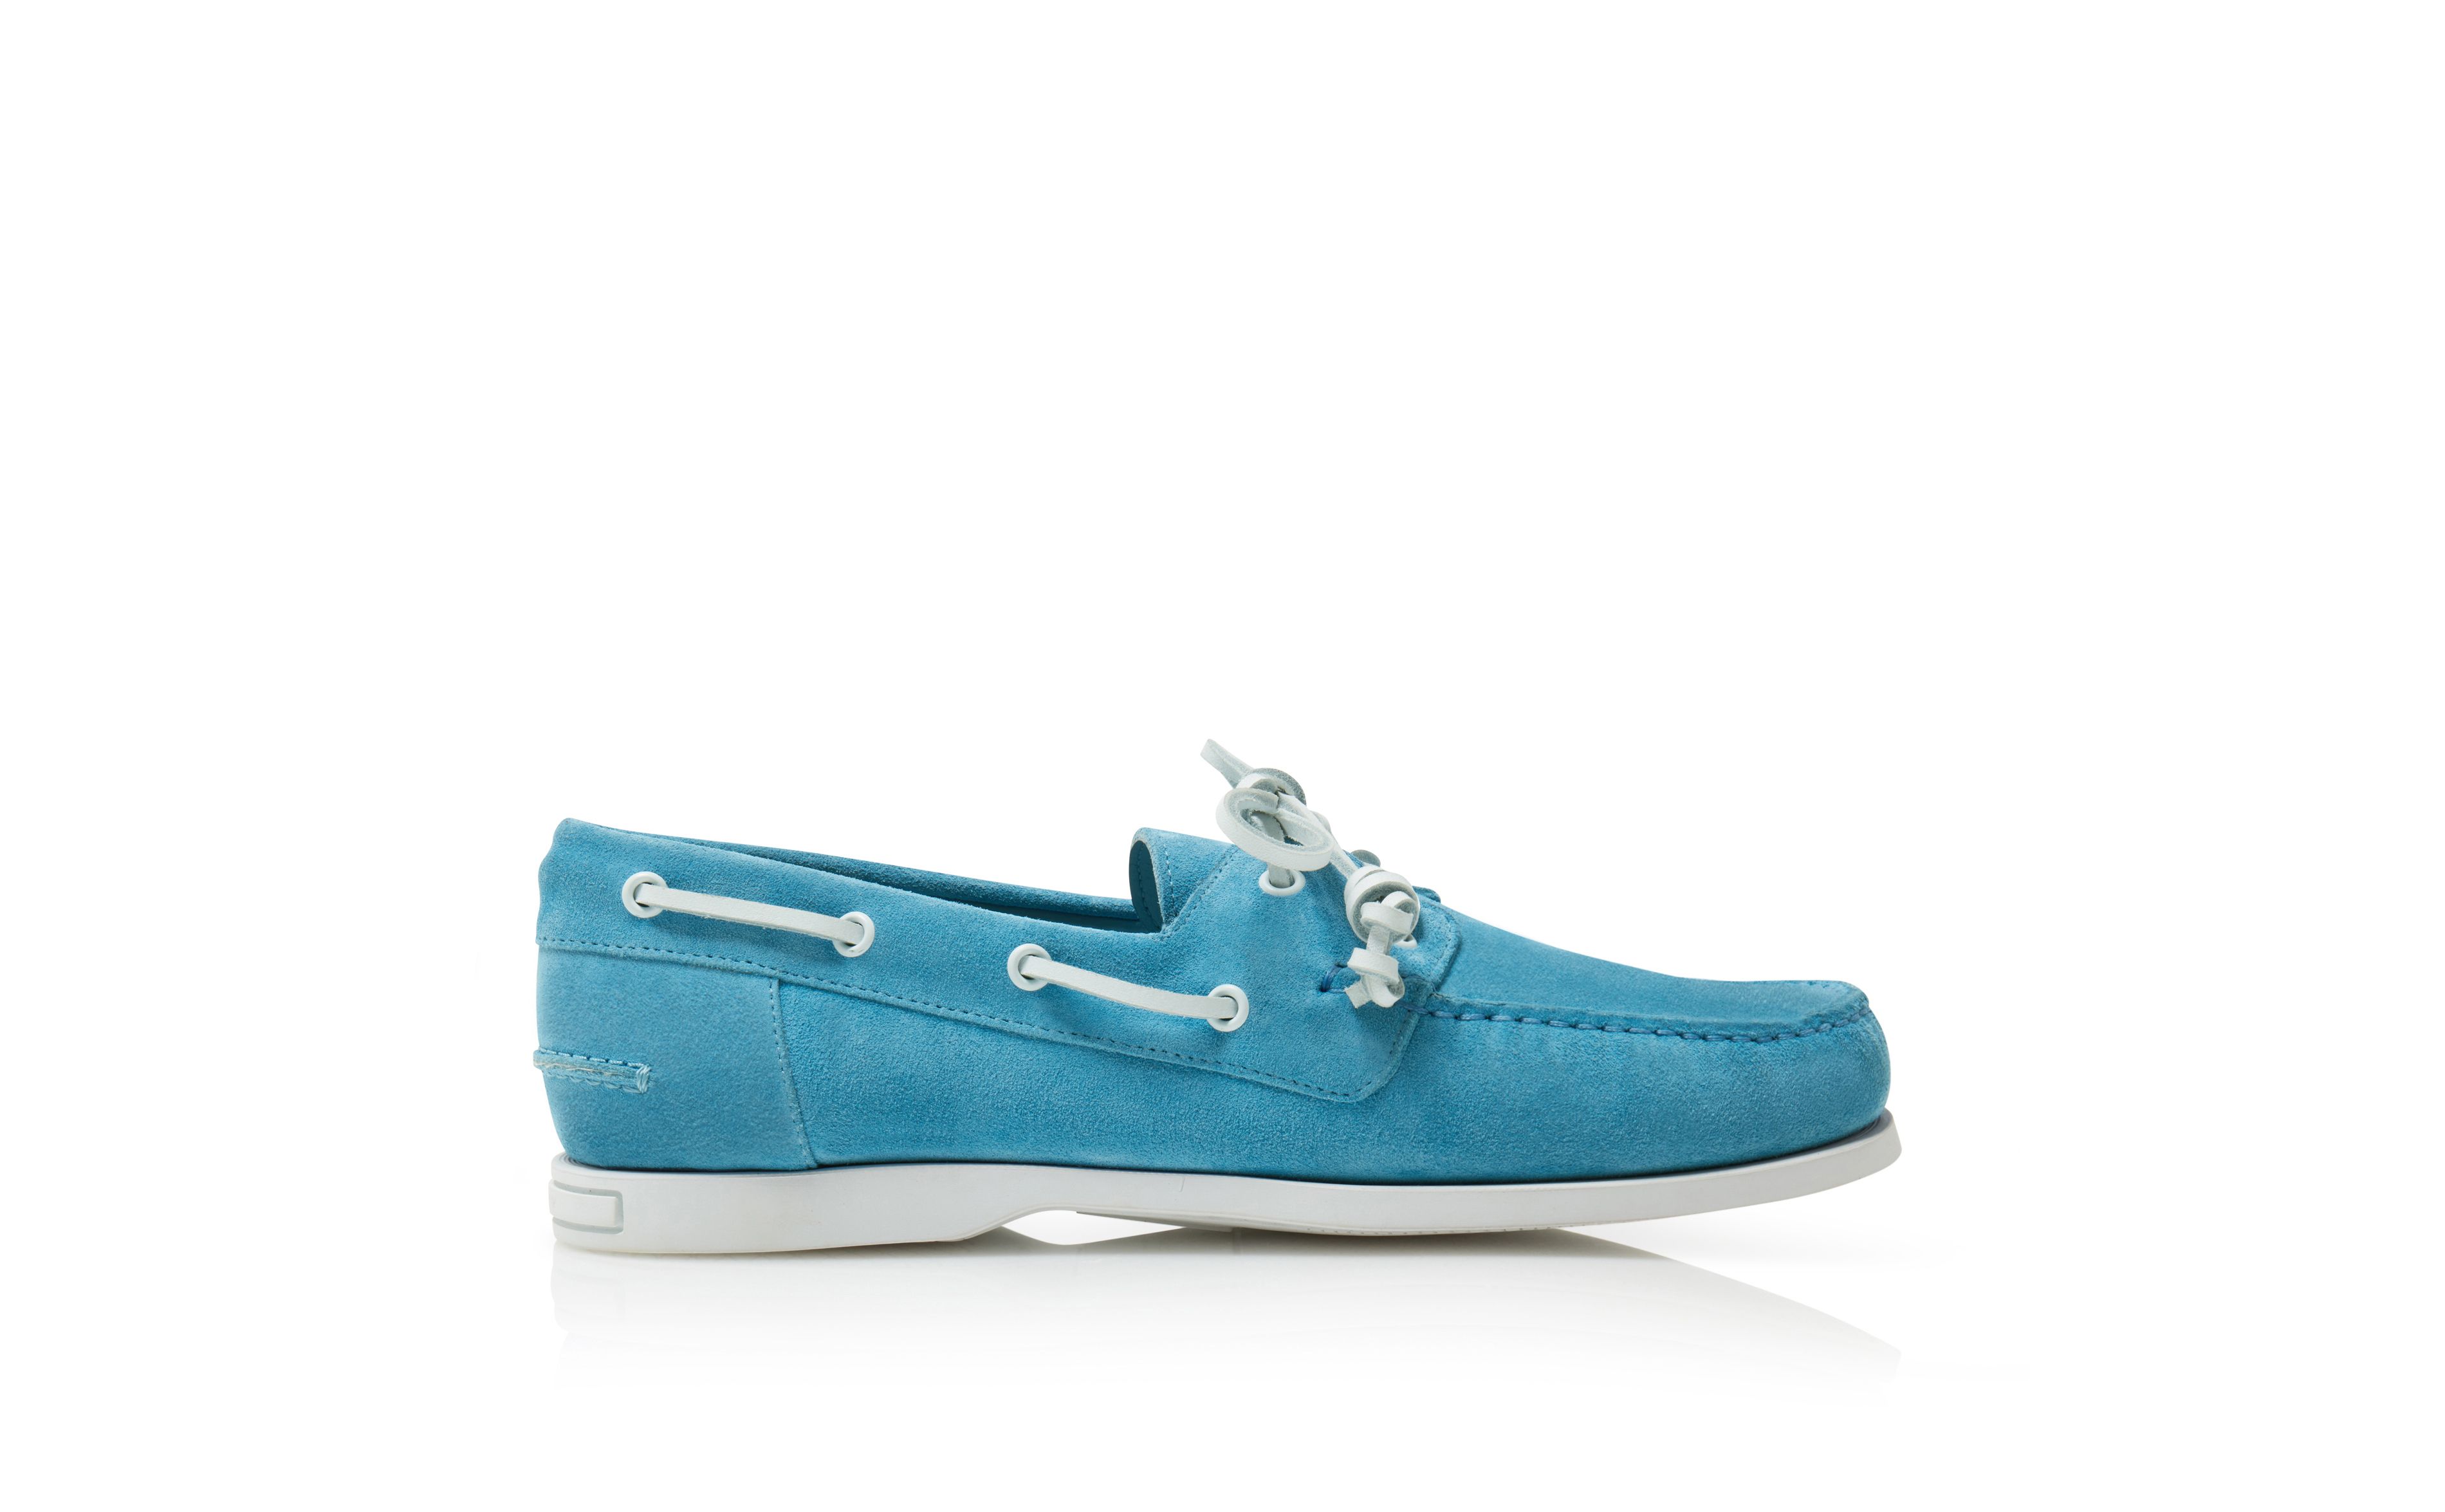 SIDMOUTH | Blue Suede Boat Shoes | Manolo Blahnik